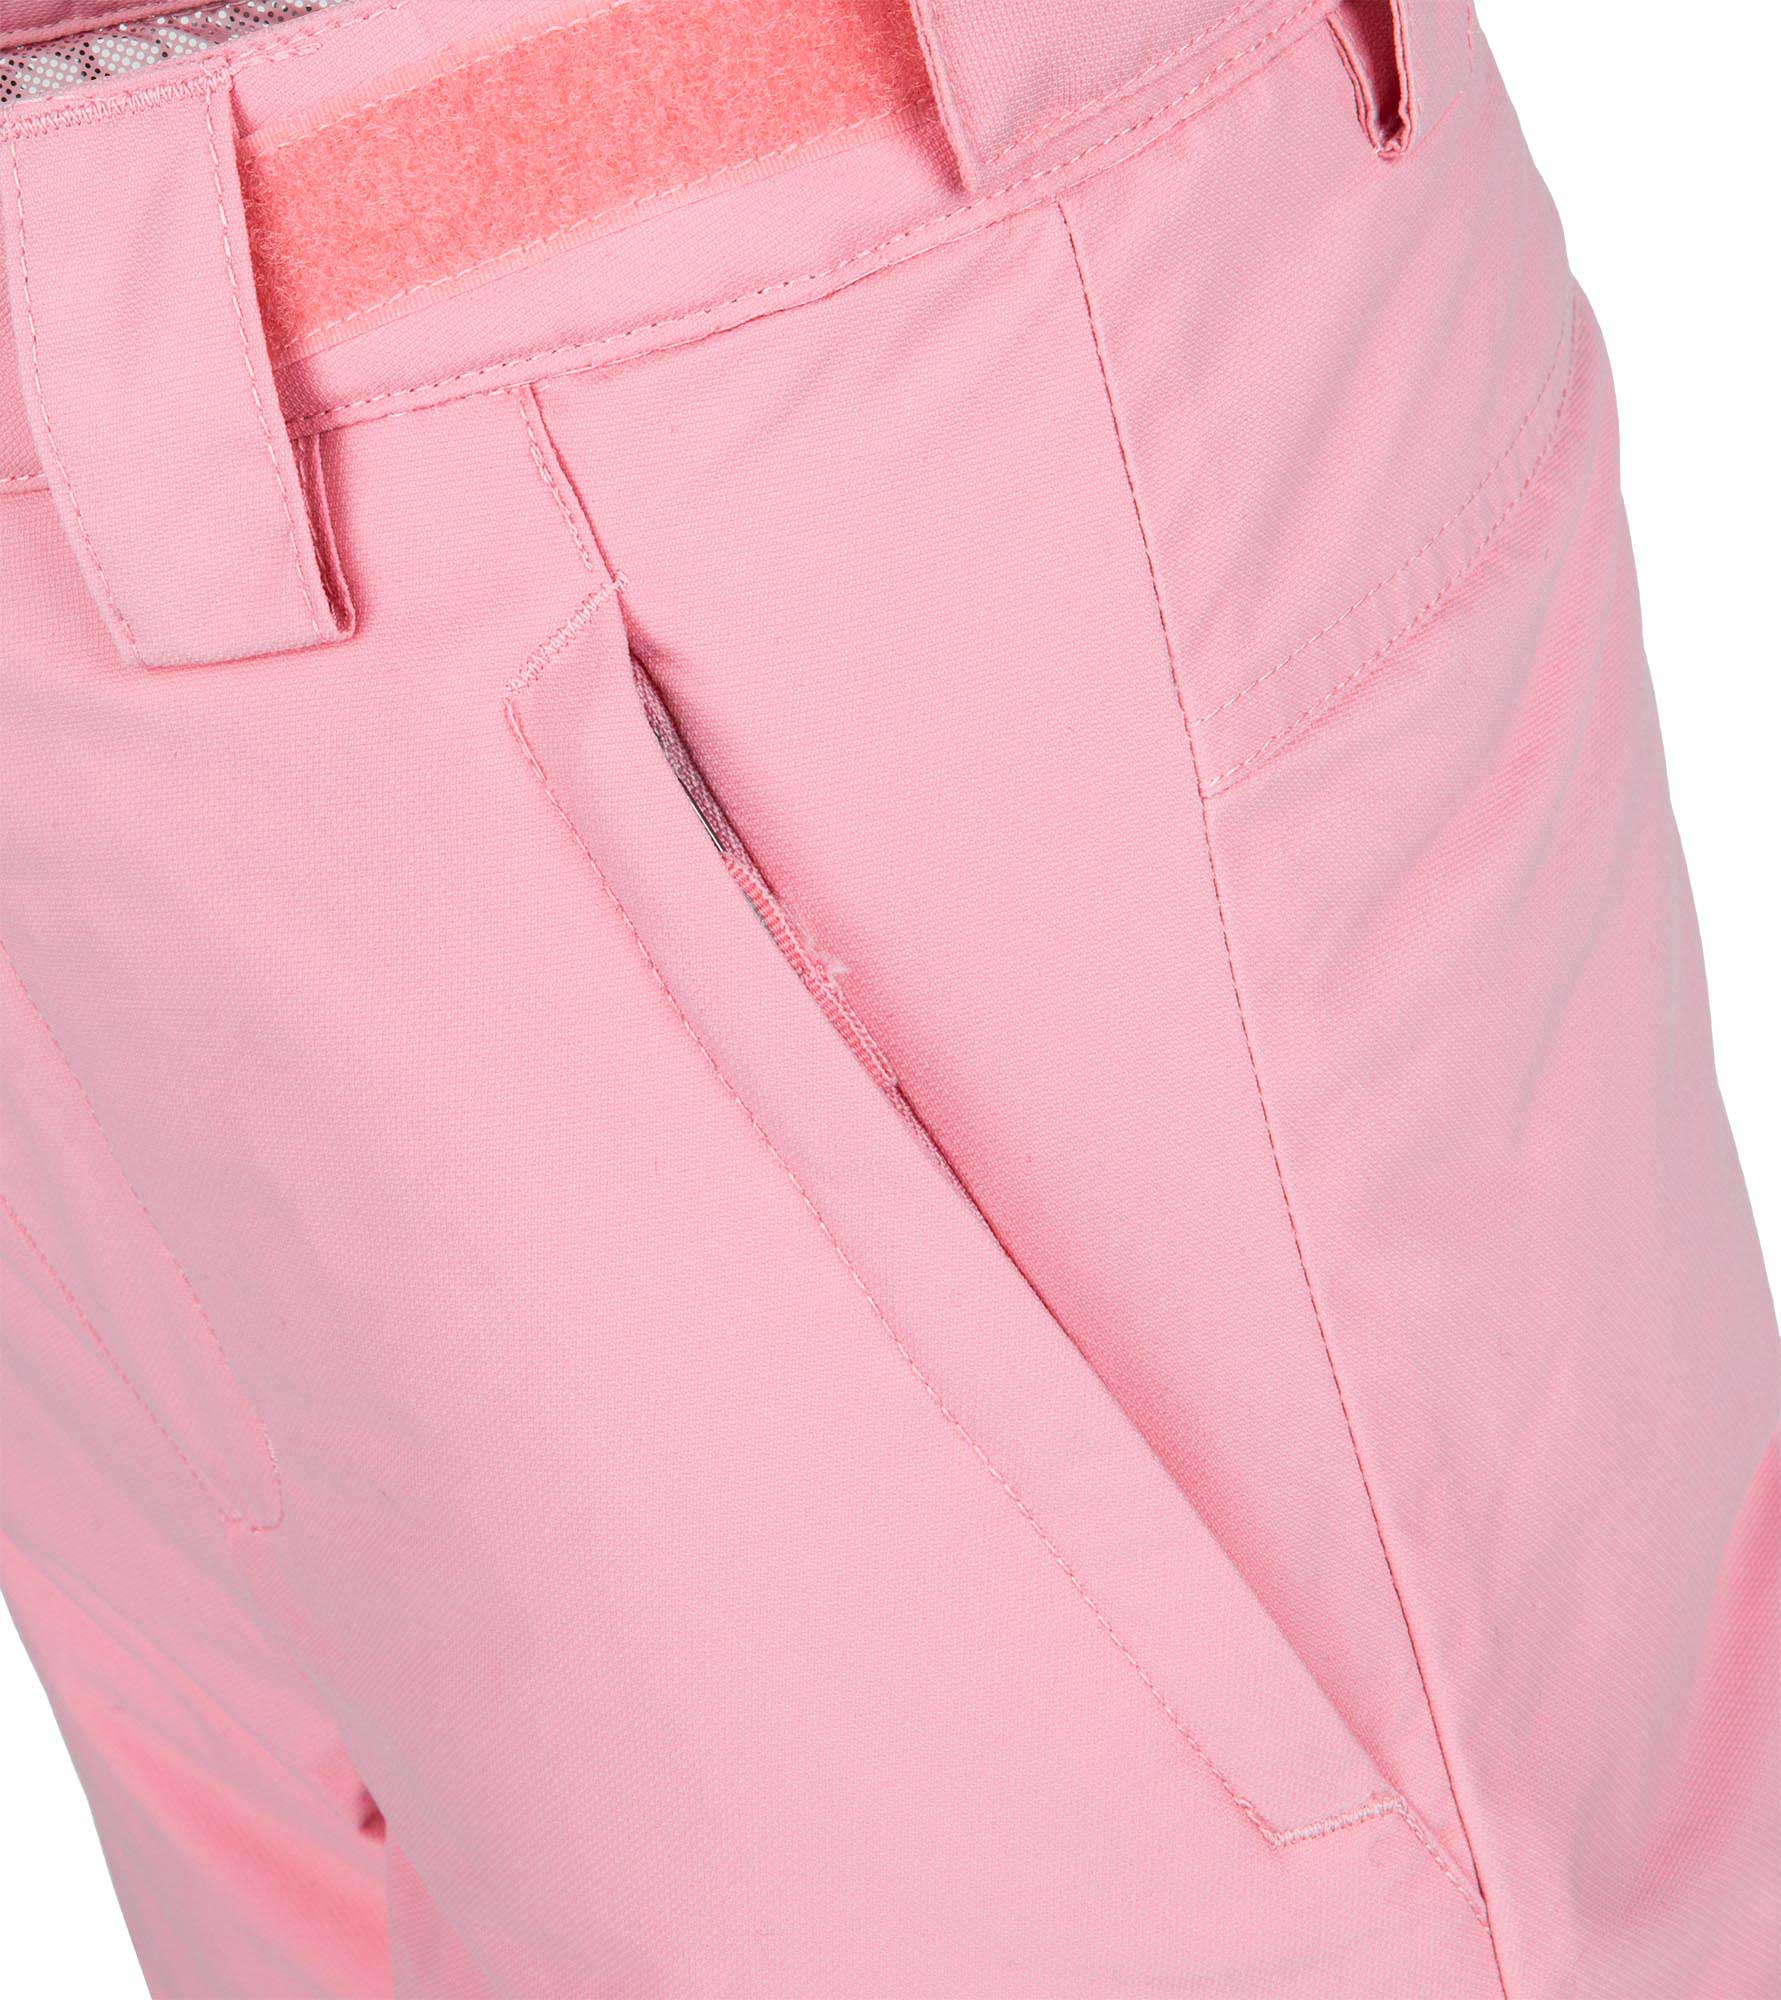 Children's insulated pants